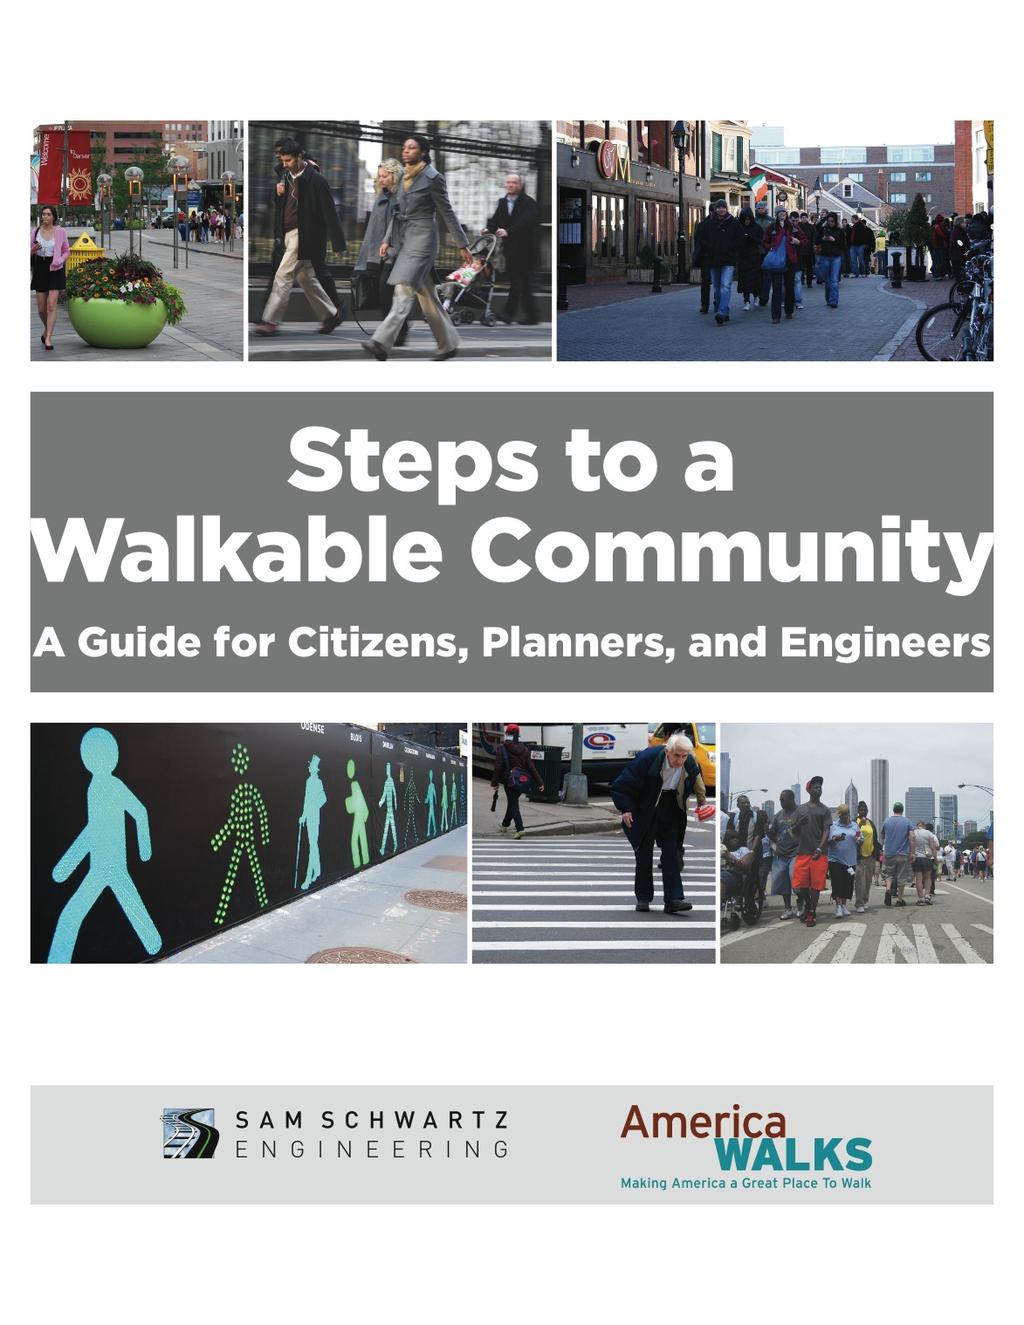 Steps to a Walkable Community Guide Steps to a Walkable Community: guide for citizens, planners, and engineers